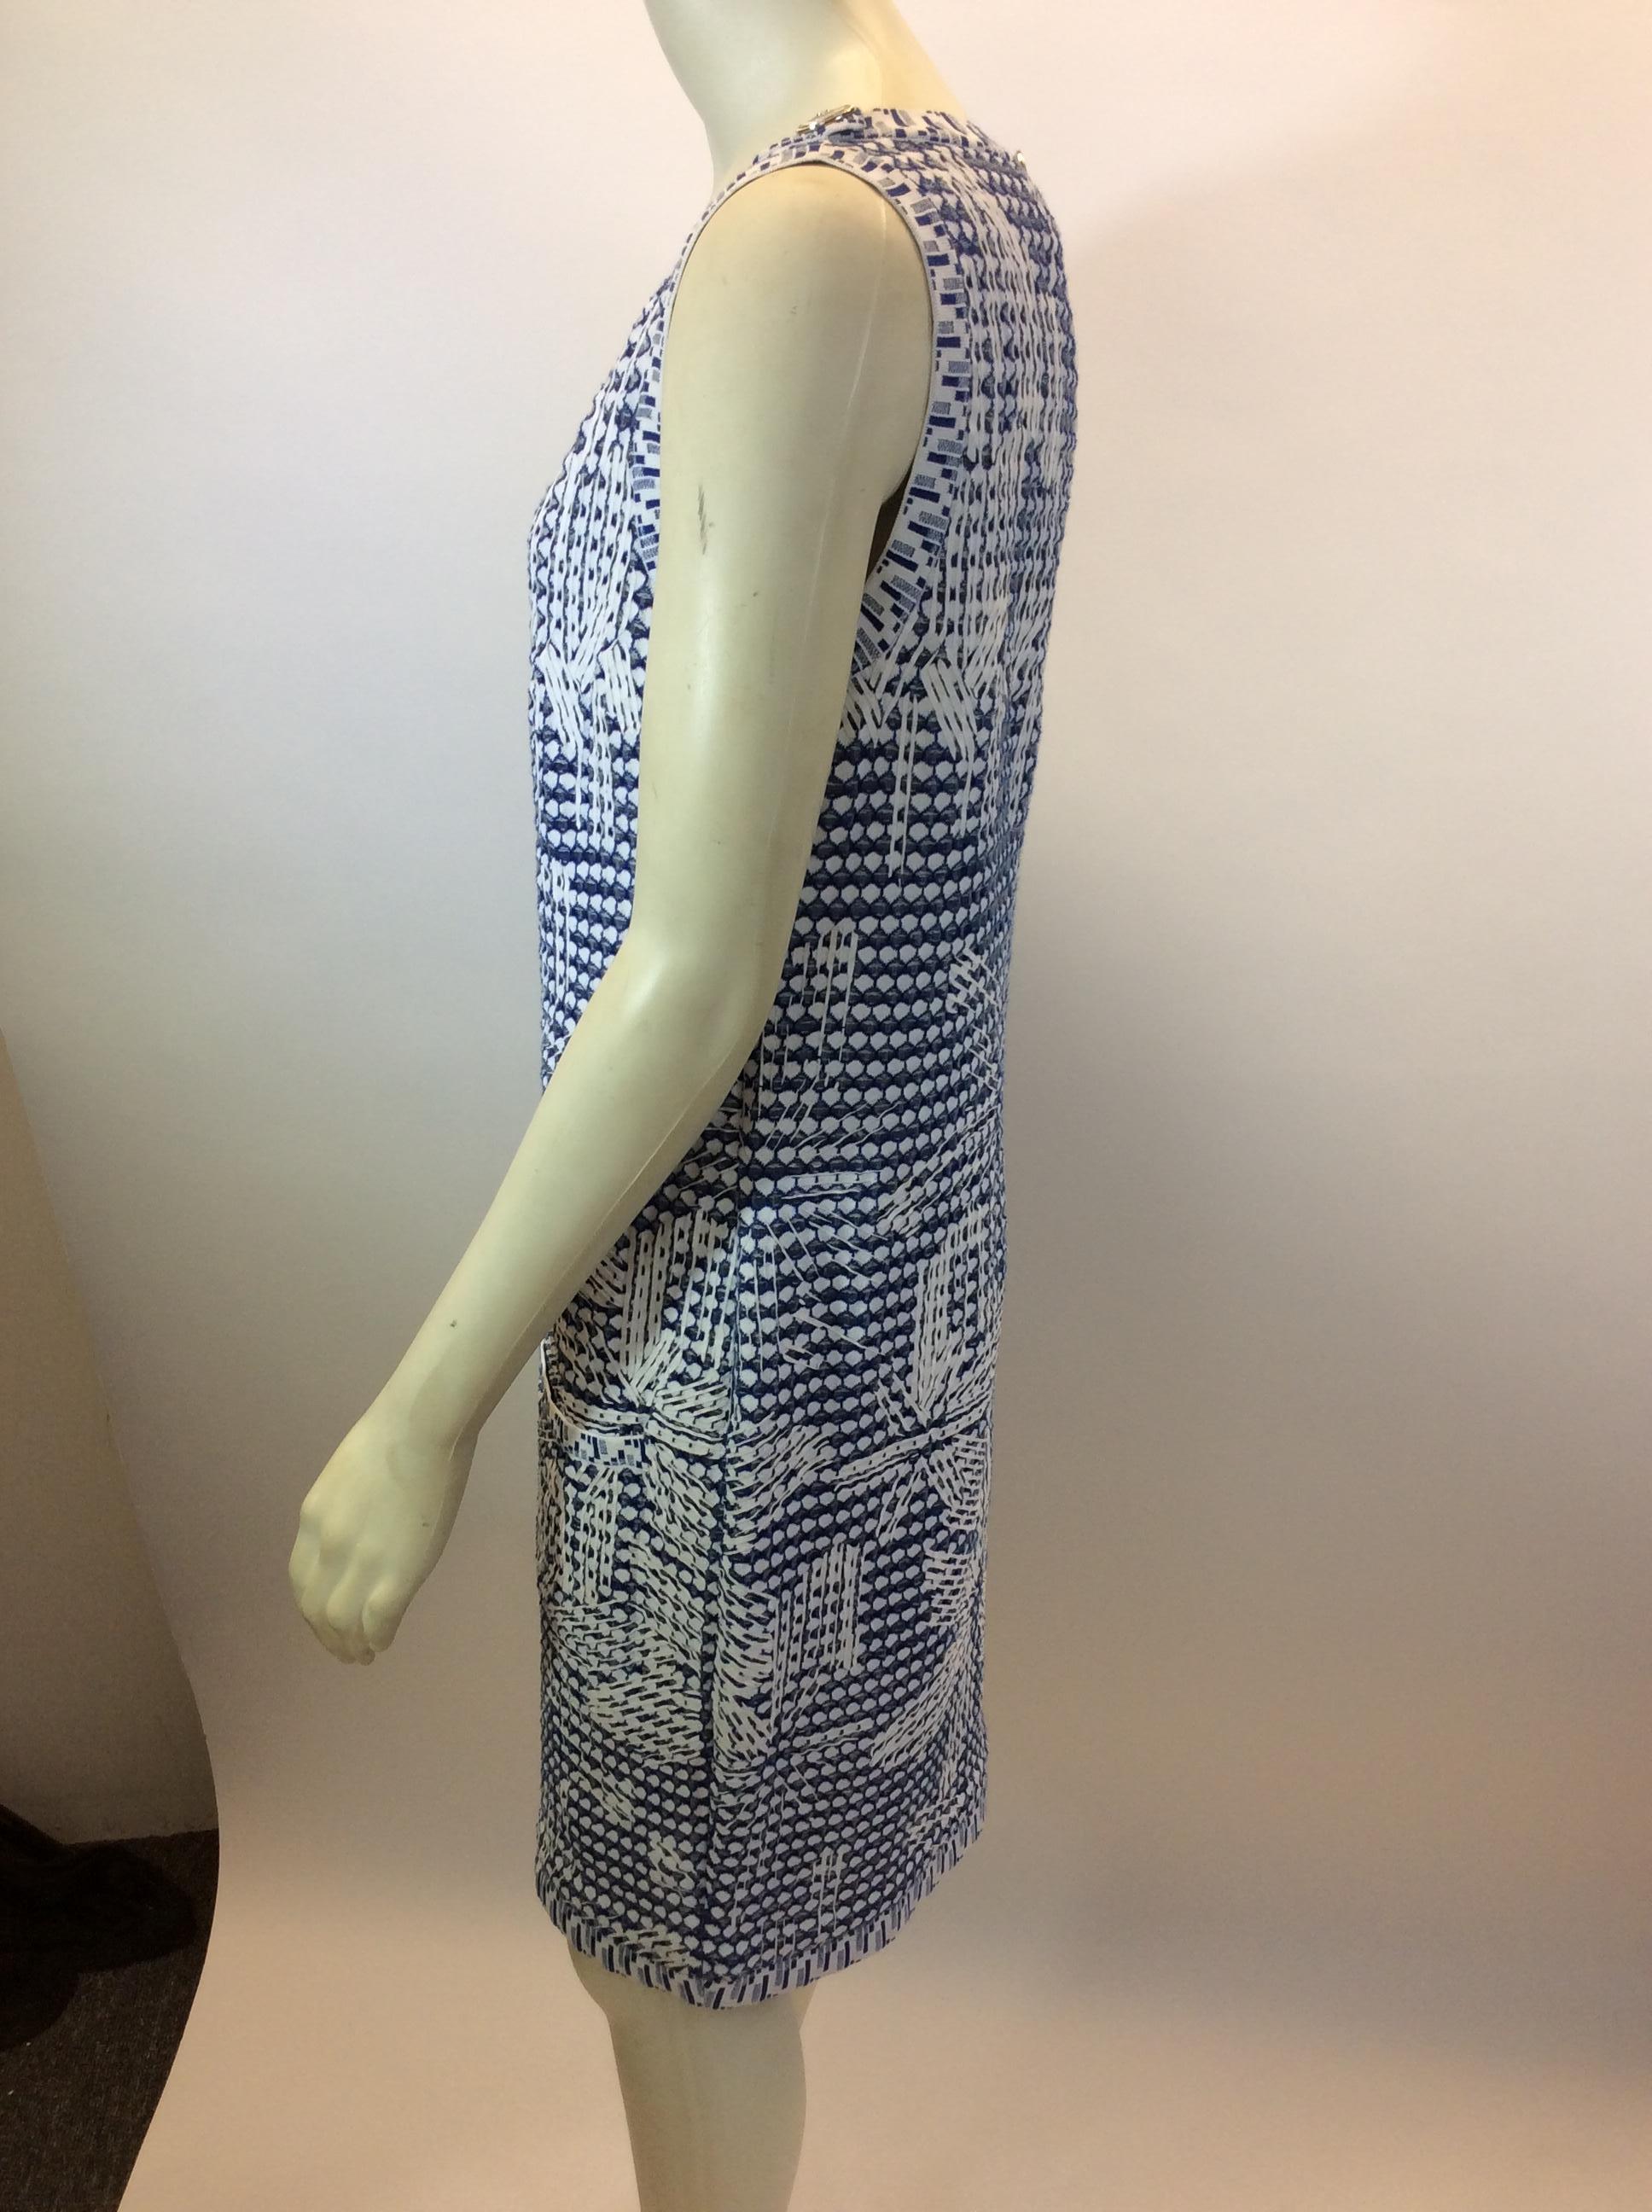 Chanel Blue and White Knit Dress
Made in Italy
50% rayon, 26% cotton, 16% polyester, 8%  nylon
Size 38
Length 34.5